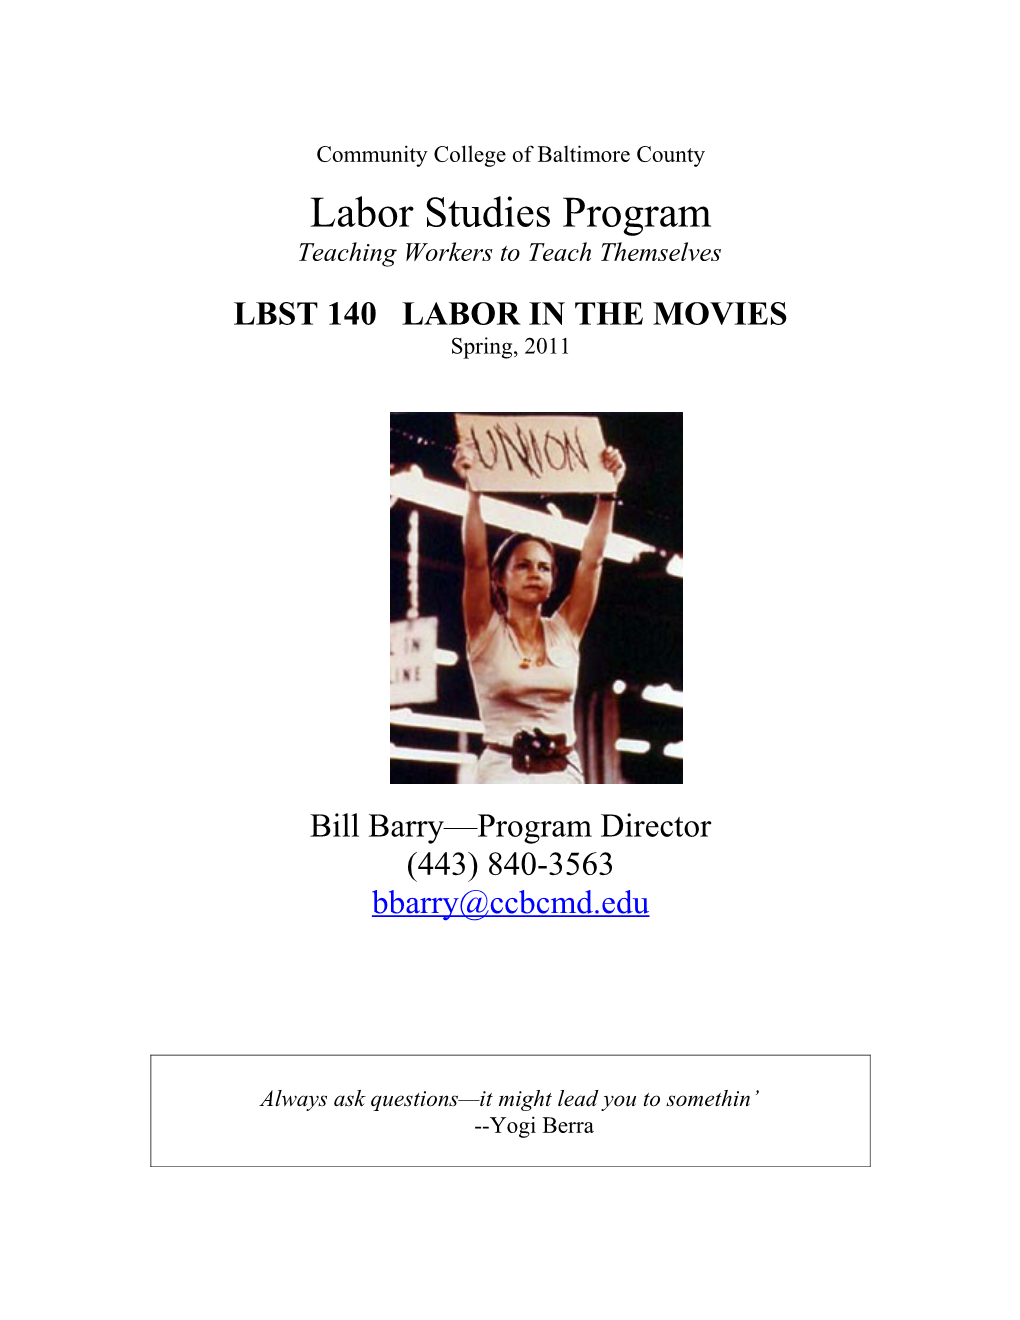 LBST 193 Labor in the Movies